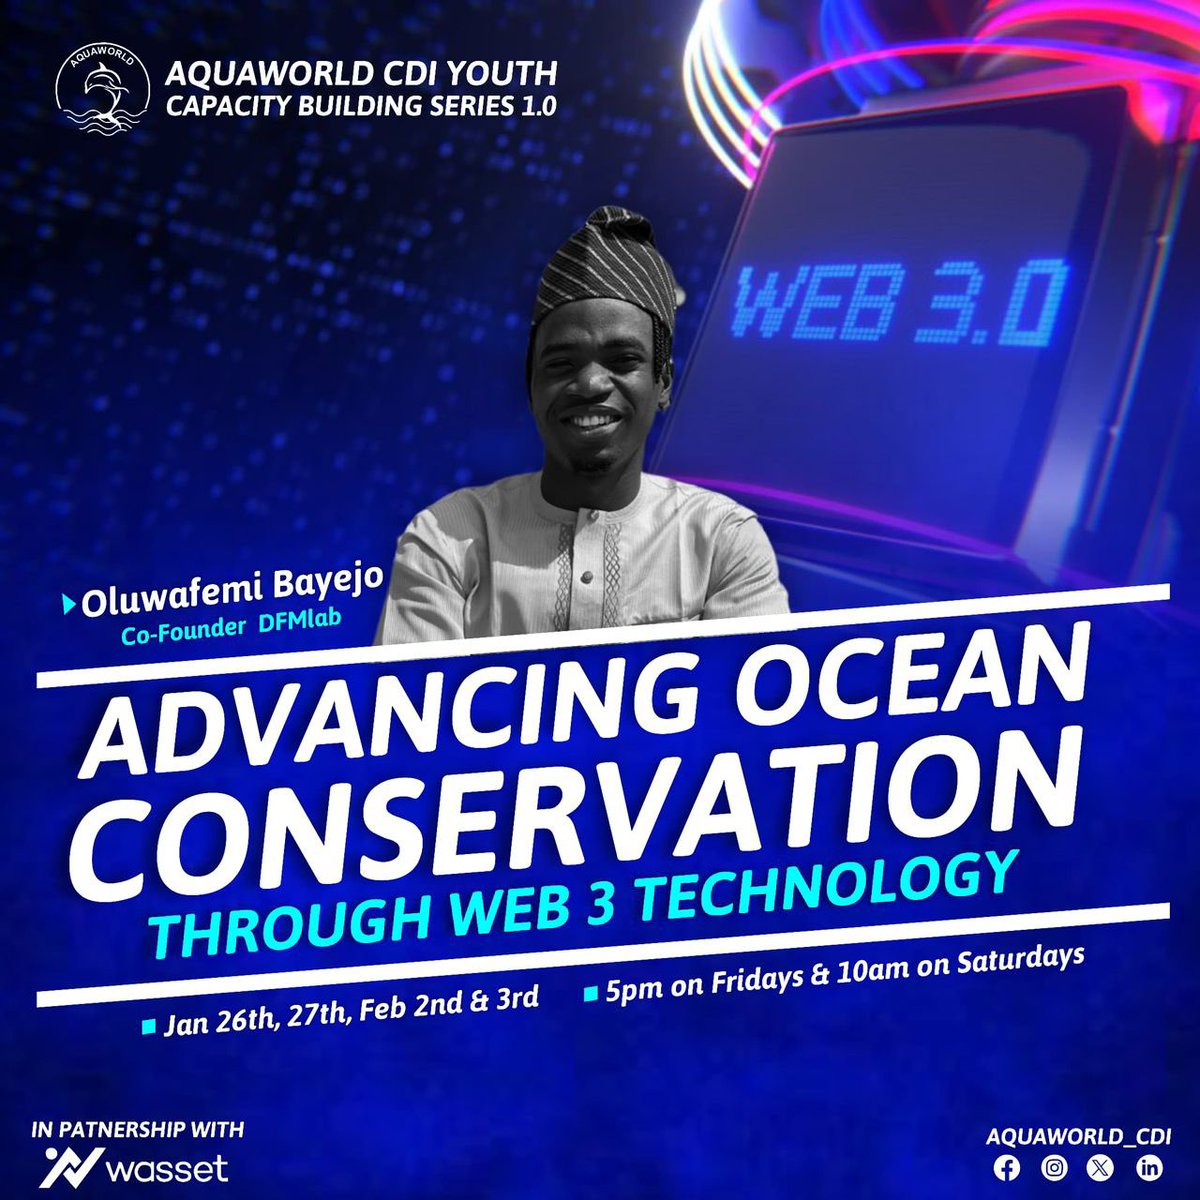 It’s happening today🤯 If you’re yet to, book your seat now and join our next training series and discover how Web3 tech can be harnessed to promote ocean conservation. Sign up here: shorturl.at/auBMV